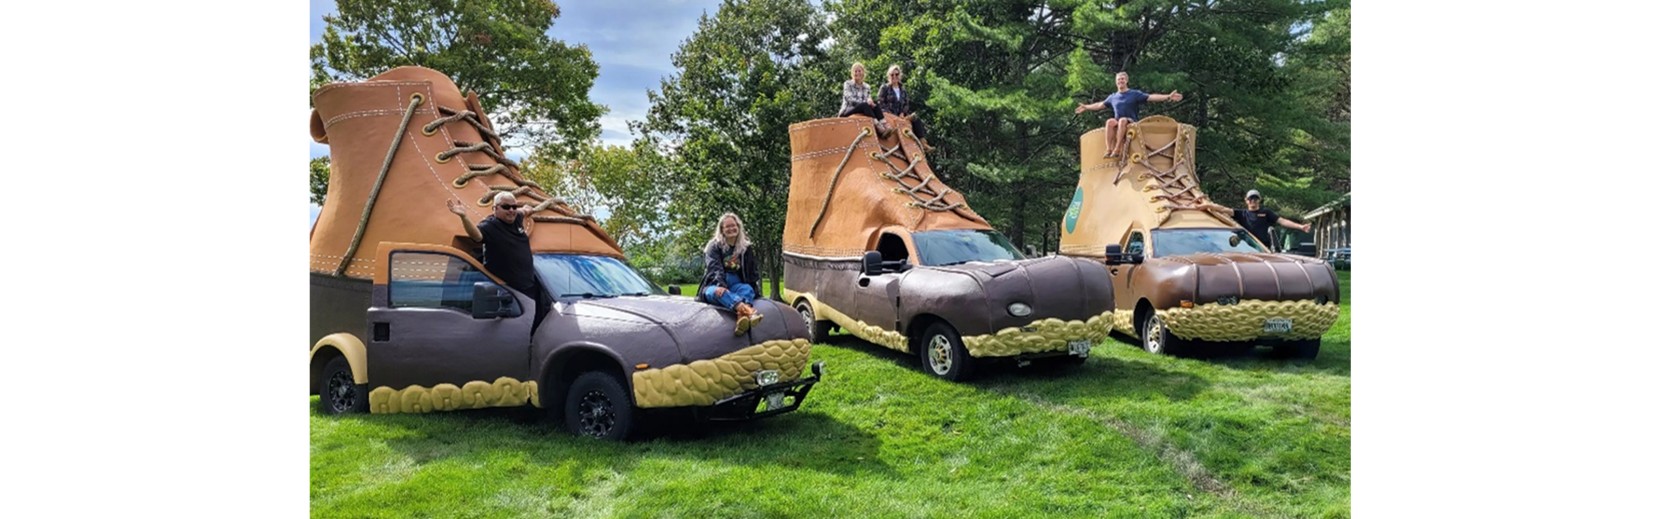 Bootmobiles on the Road